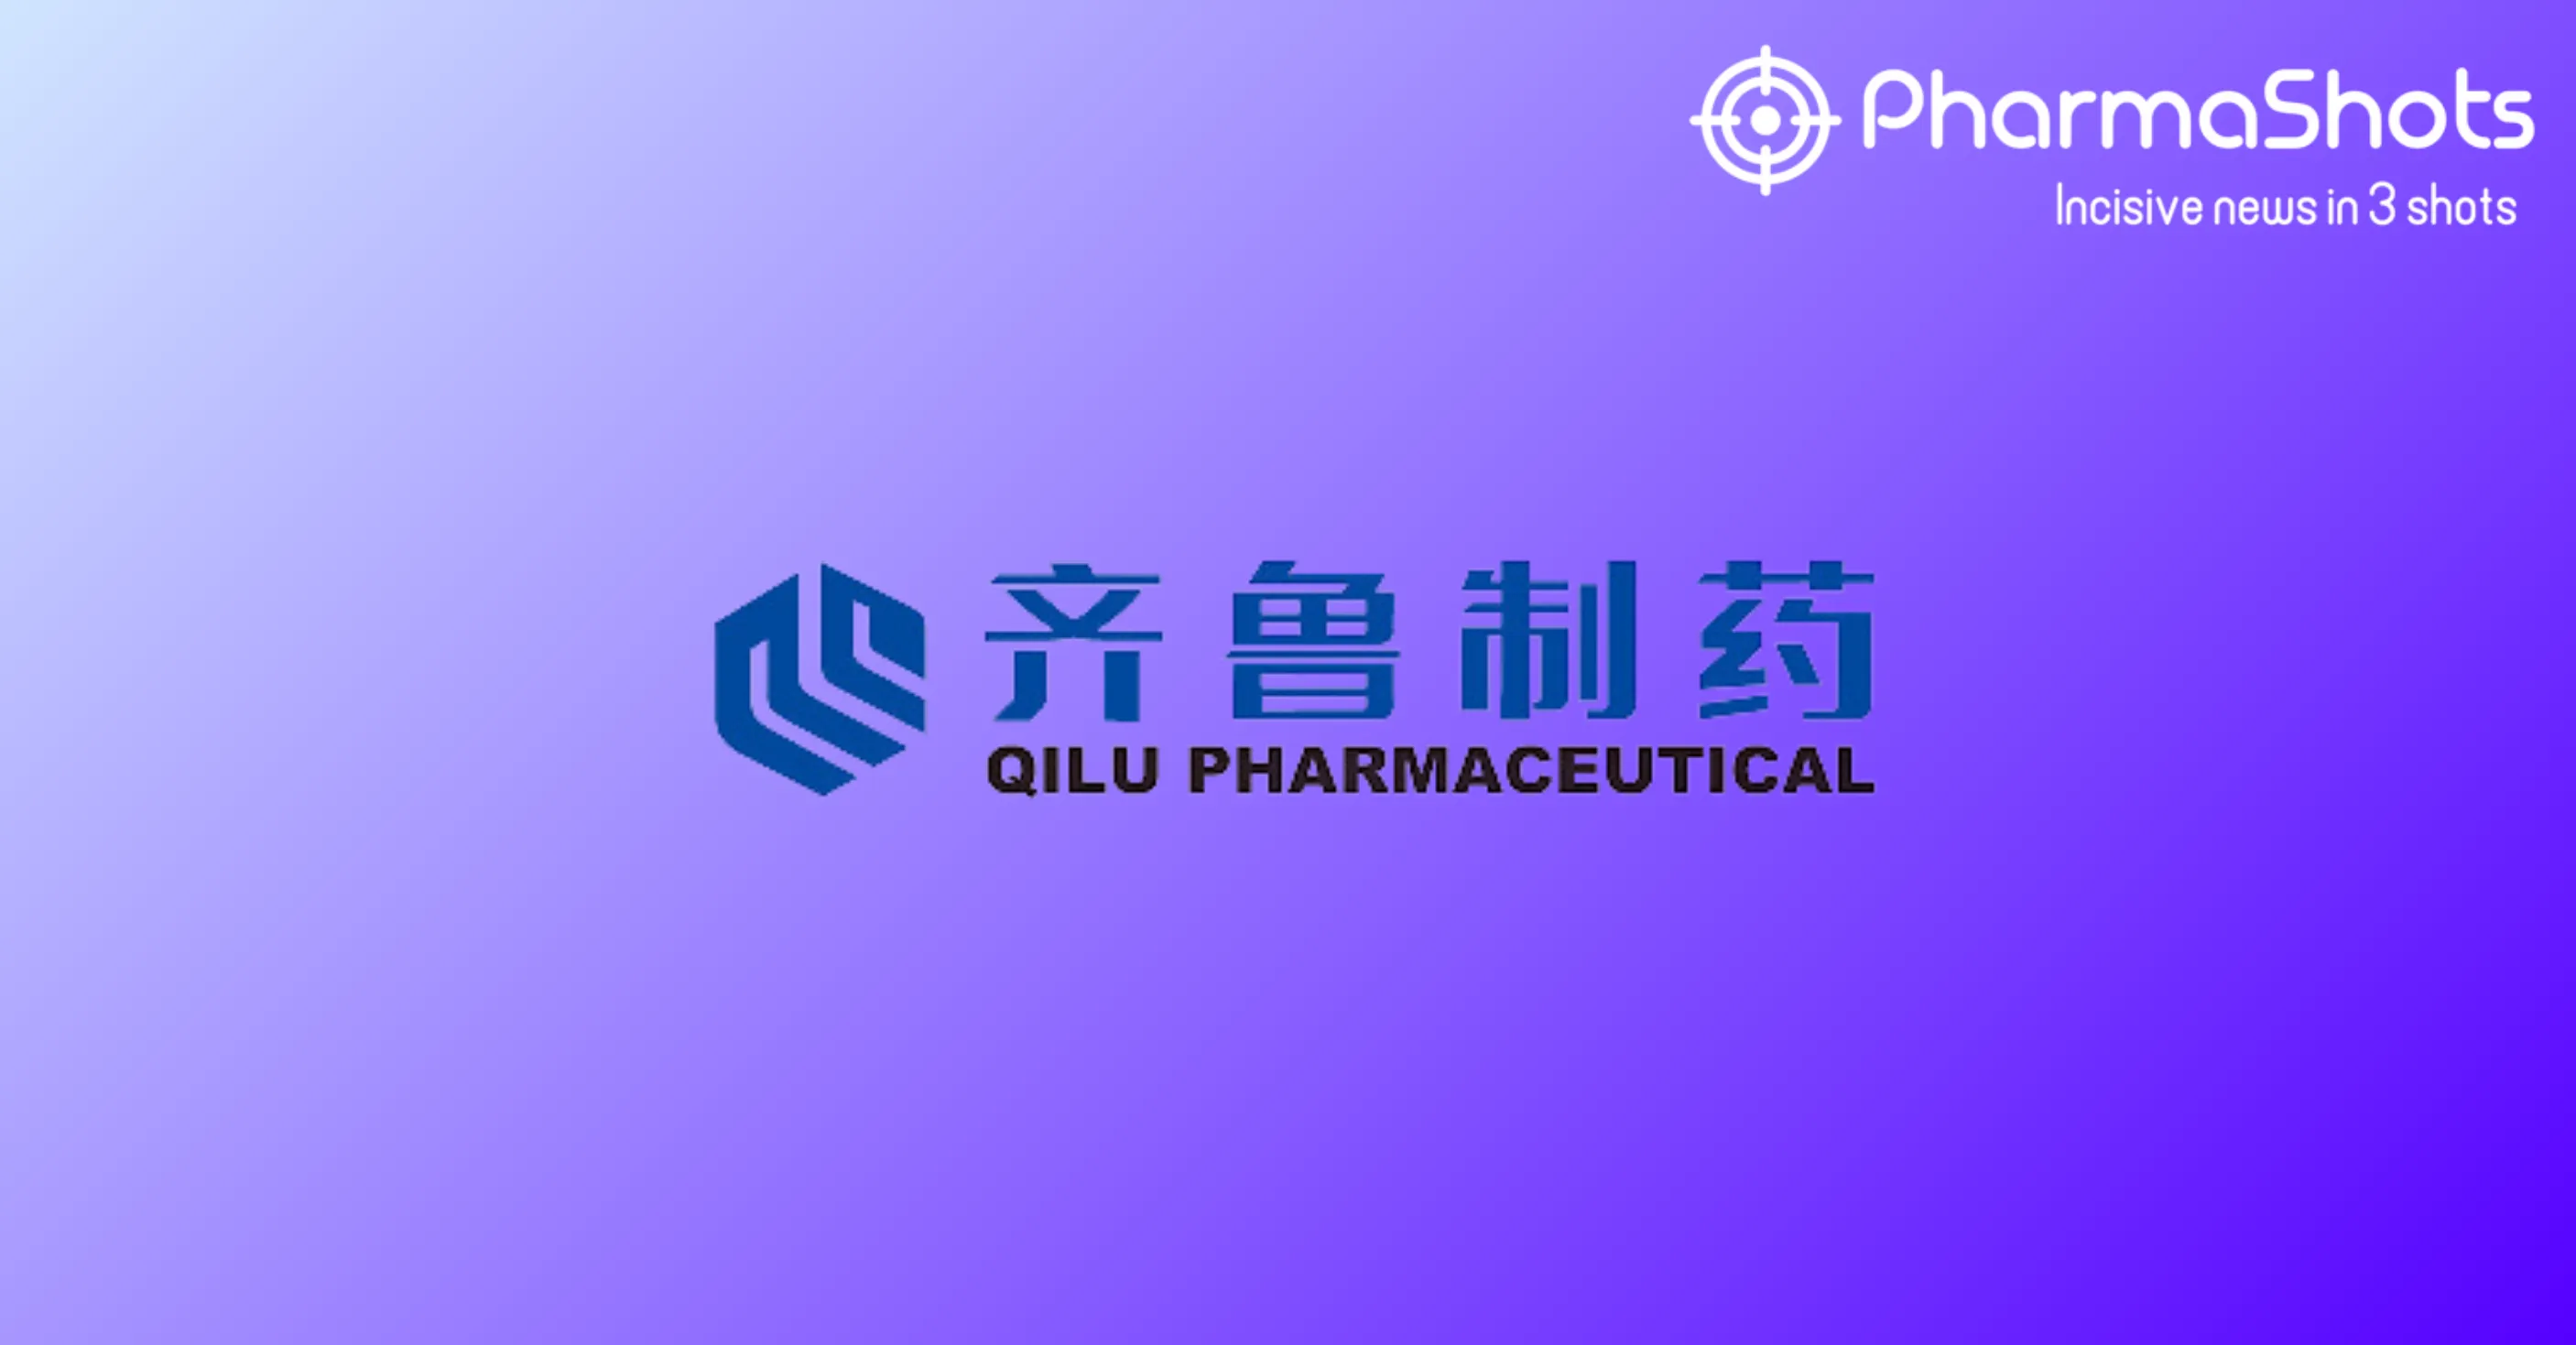 Qilu Pharmaceutical Reports Results from the P-II Trial of QL1706 for Non-Small Cell Lung Cancer (NSCLC)